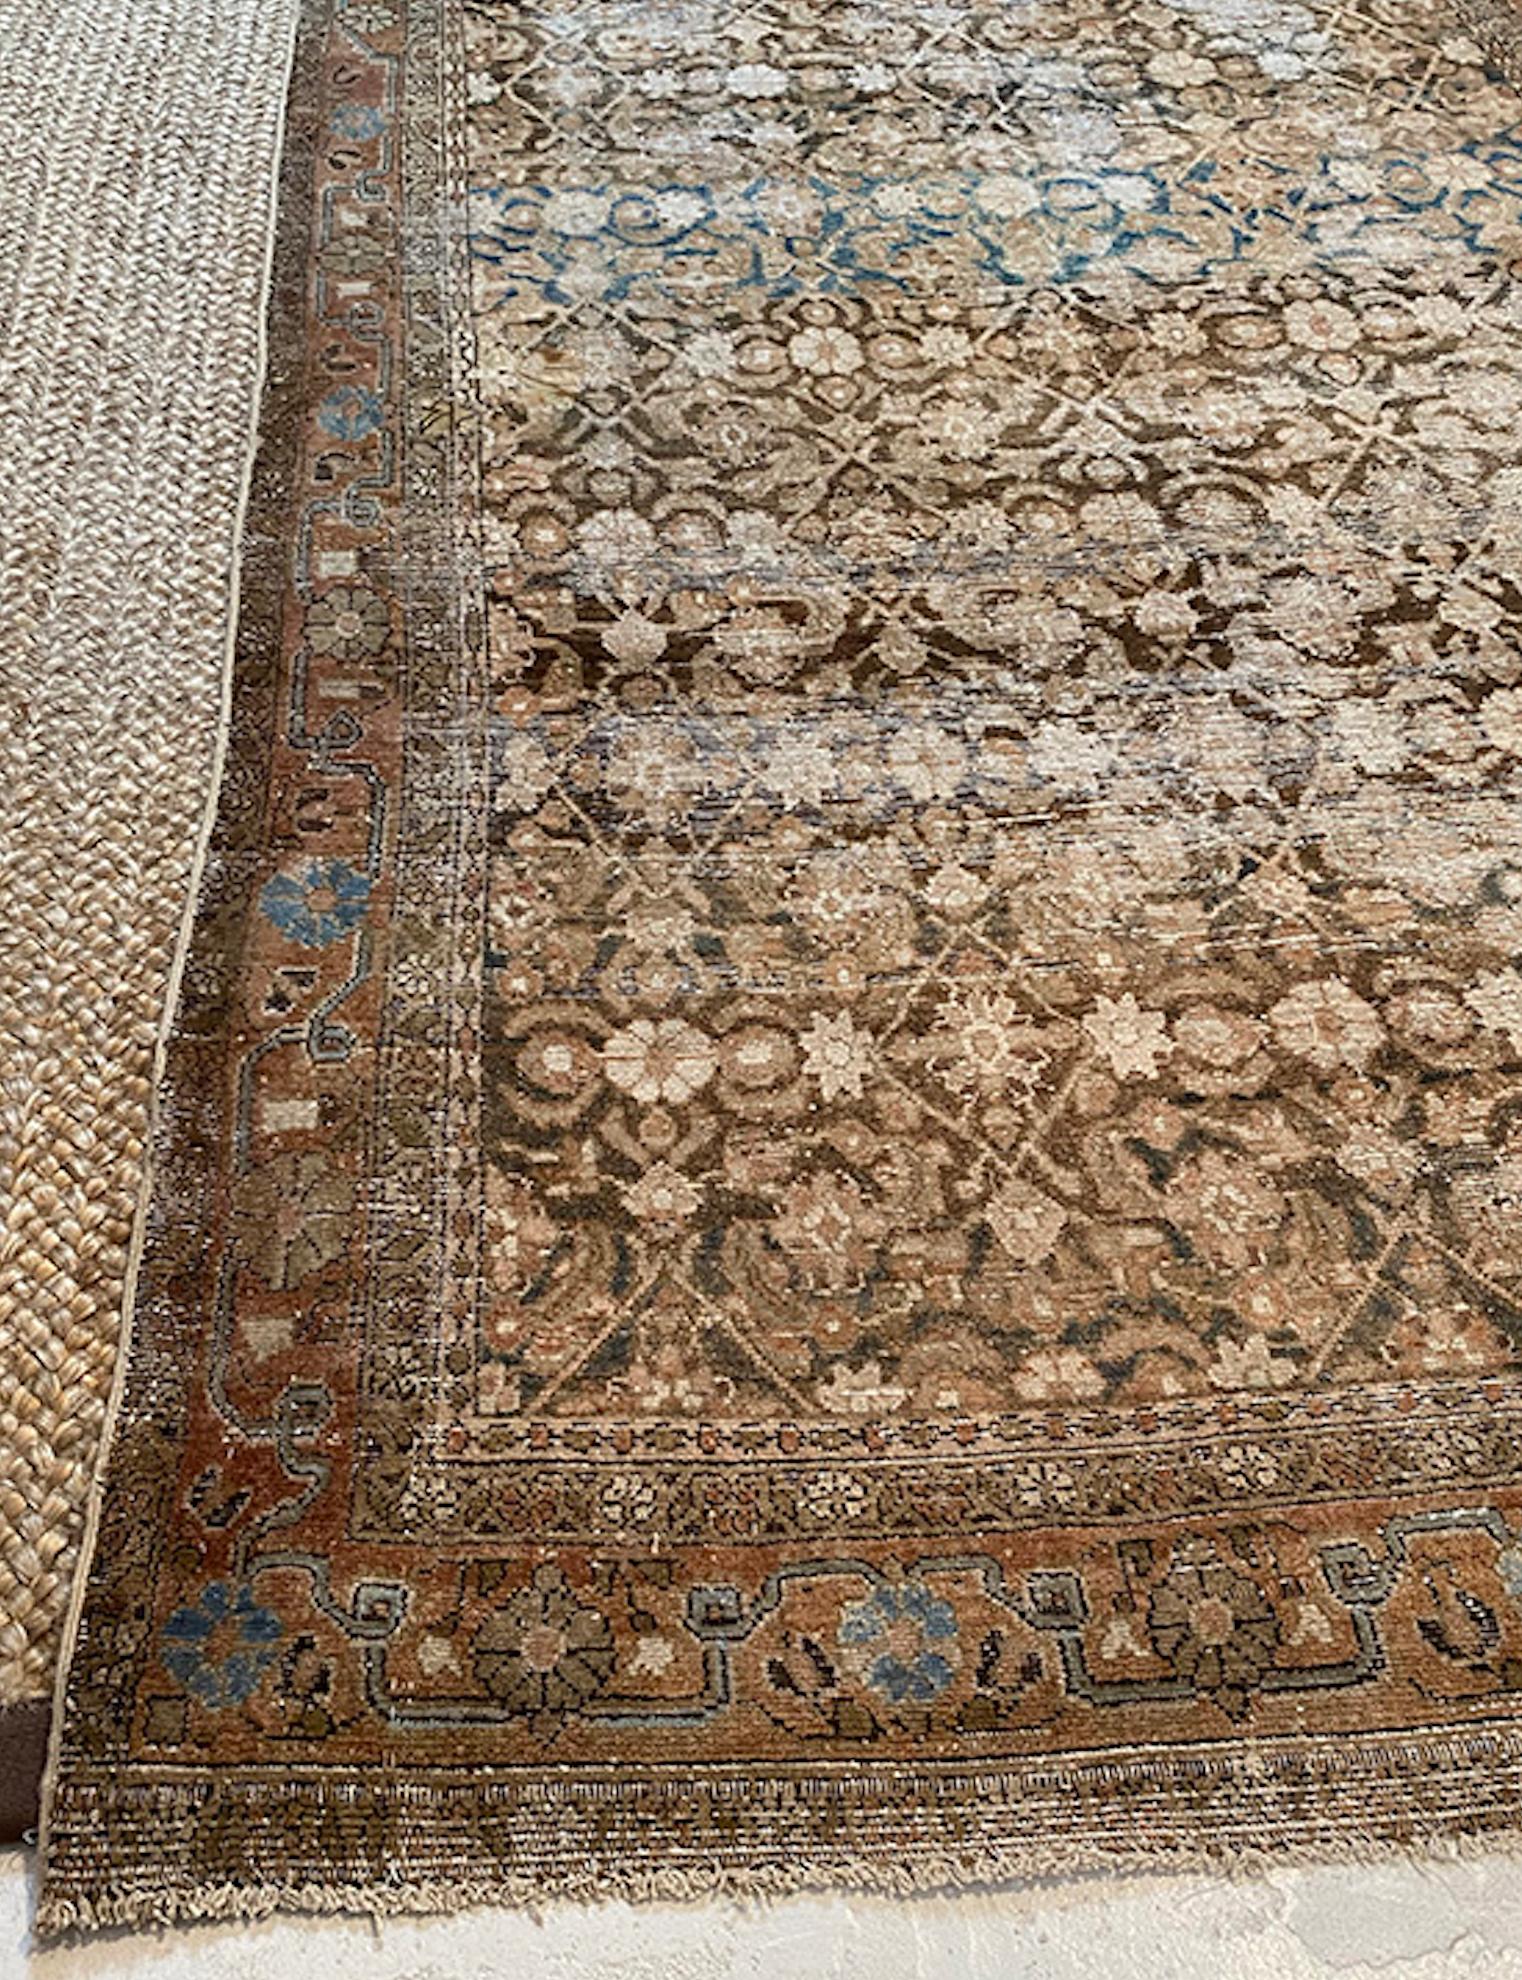 Antique Persian Runner In Good Condition For Sale In Sag Harbor, NY